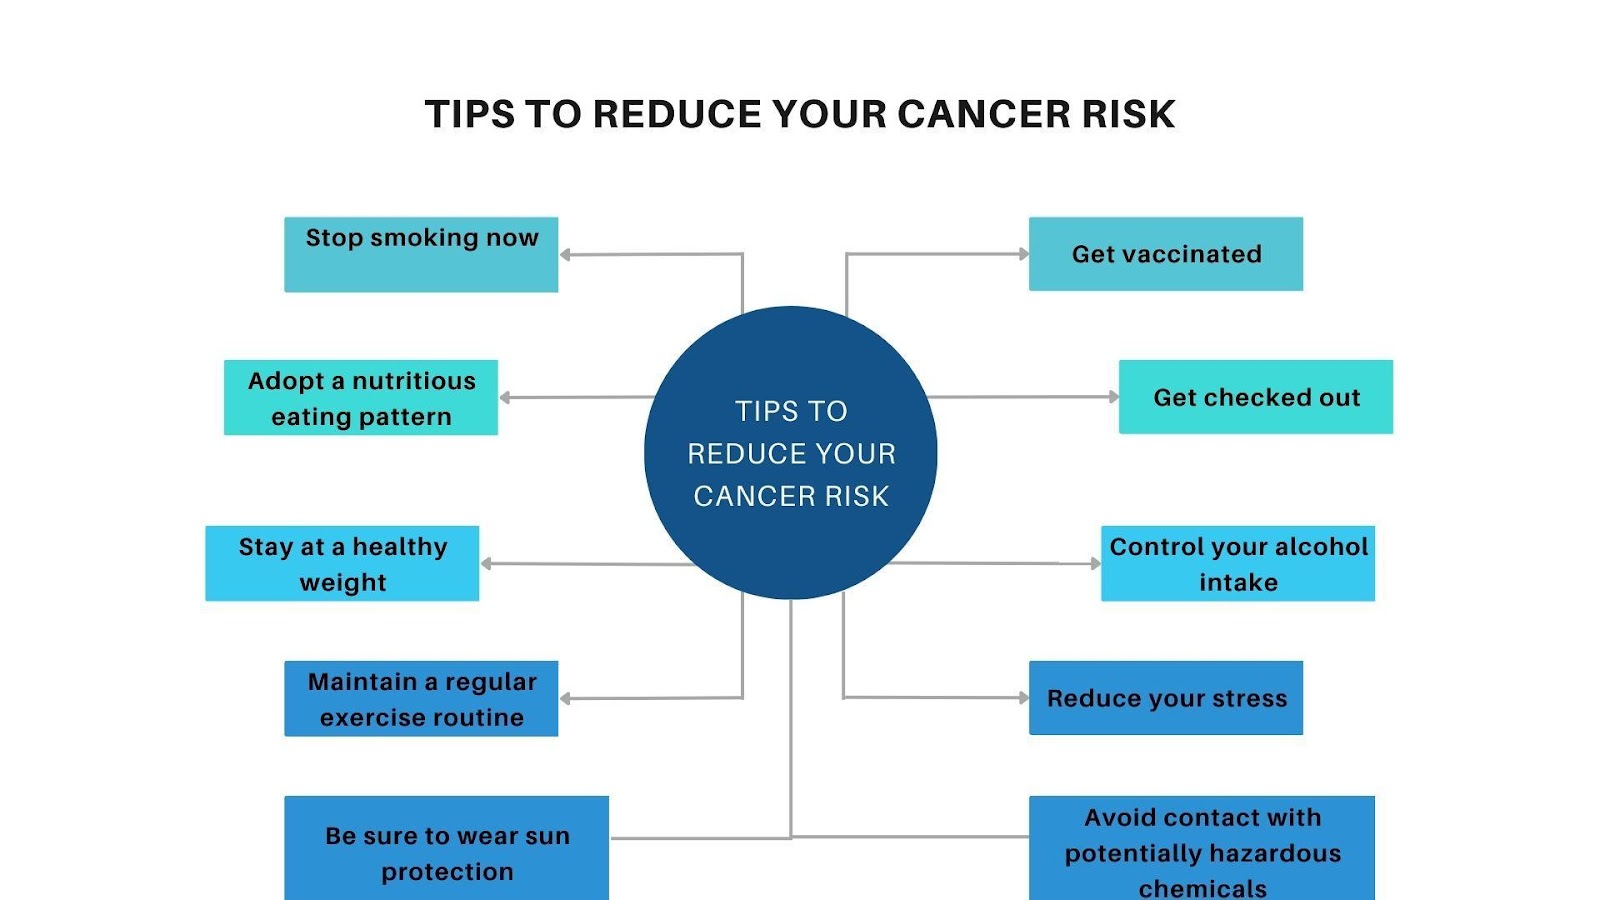 Tips to reduce your cancer risk